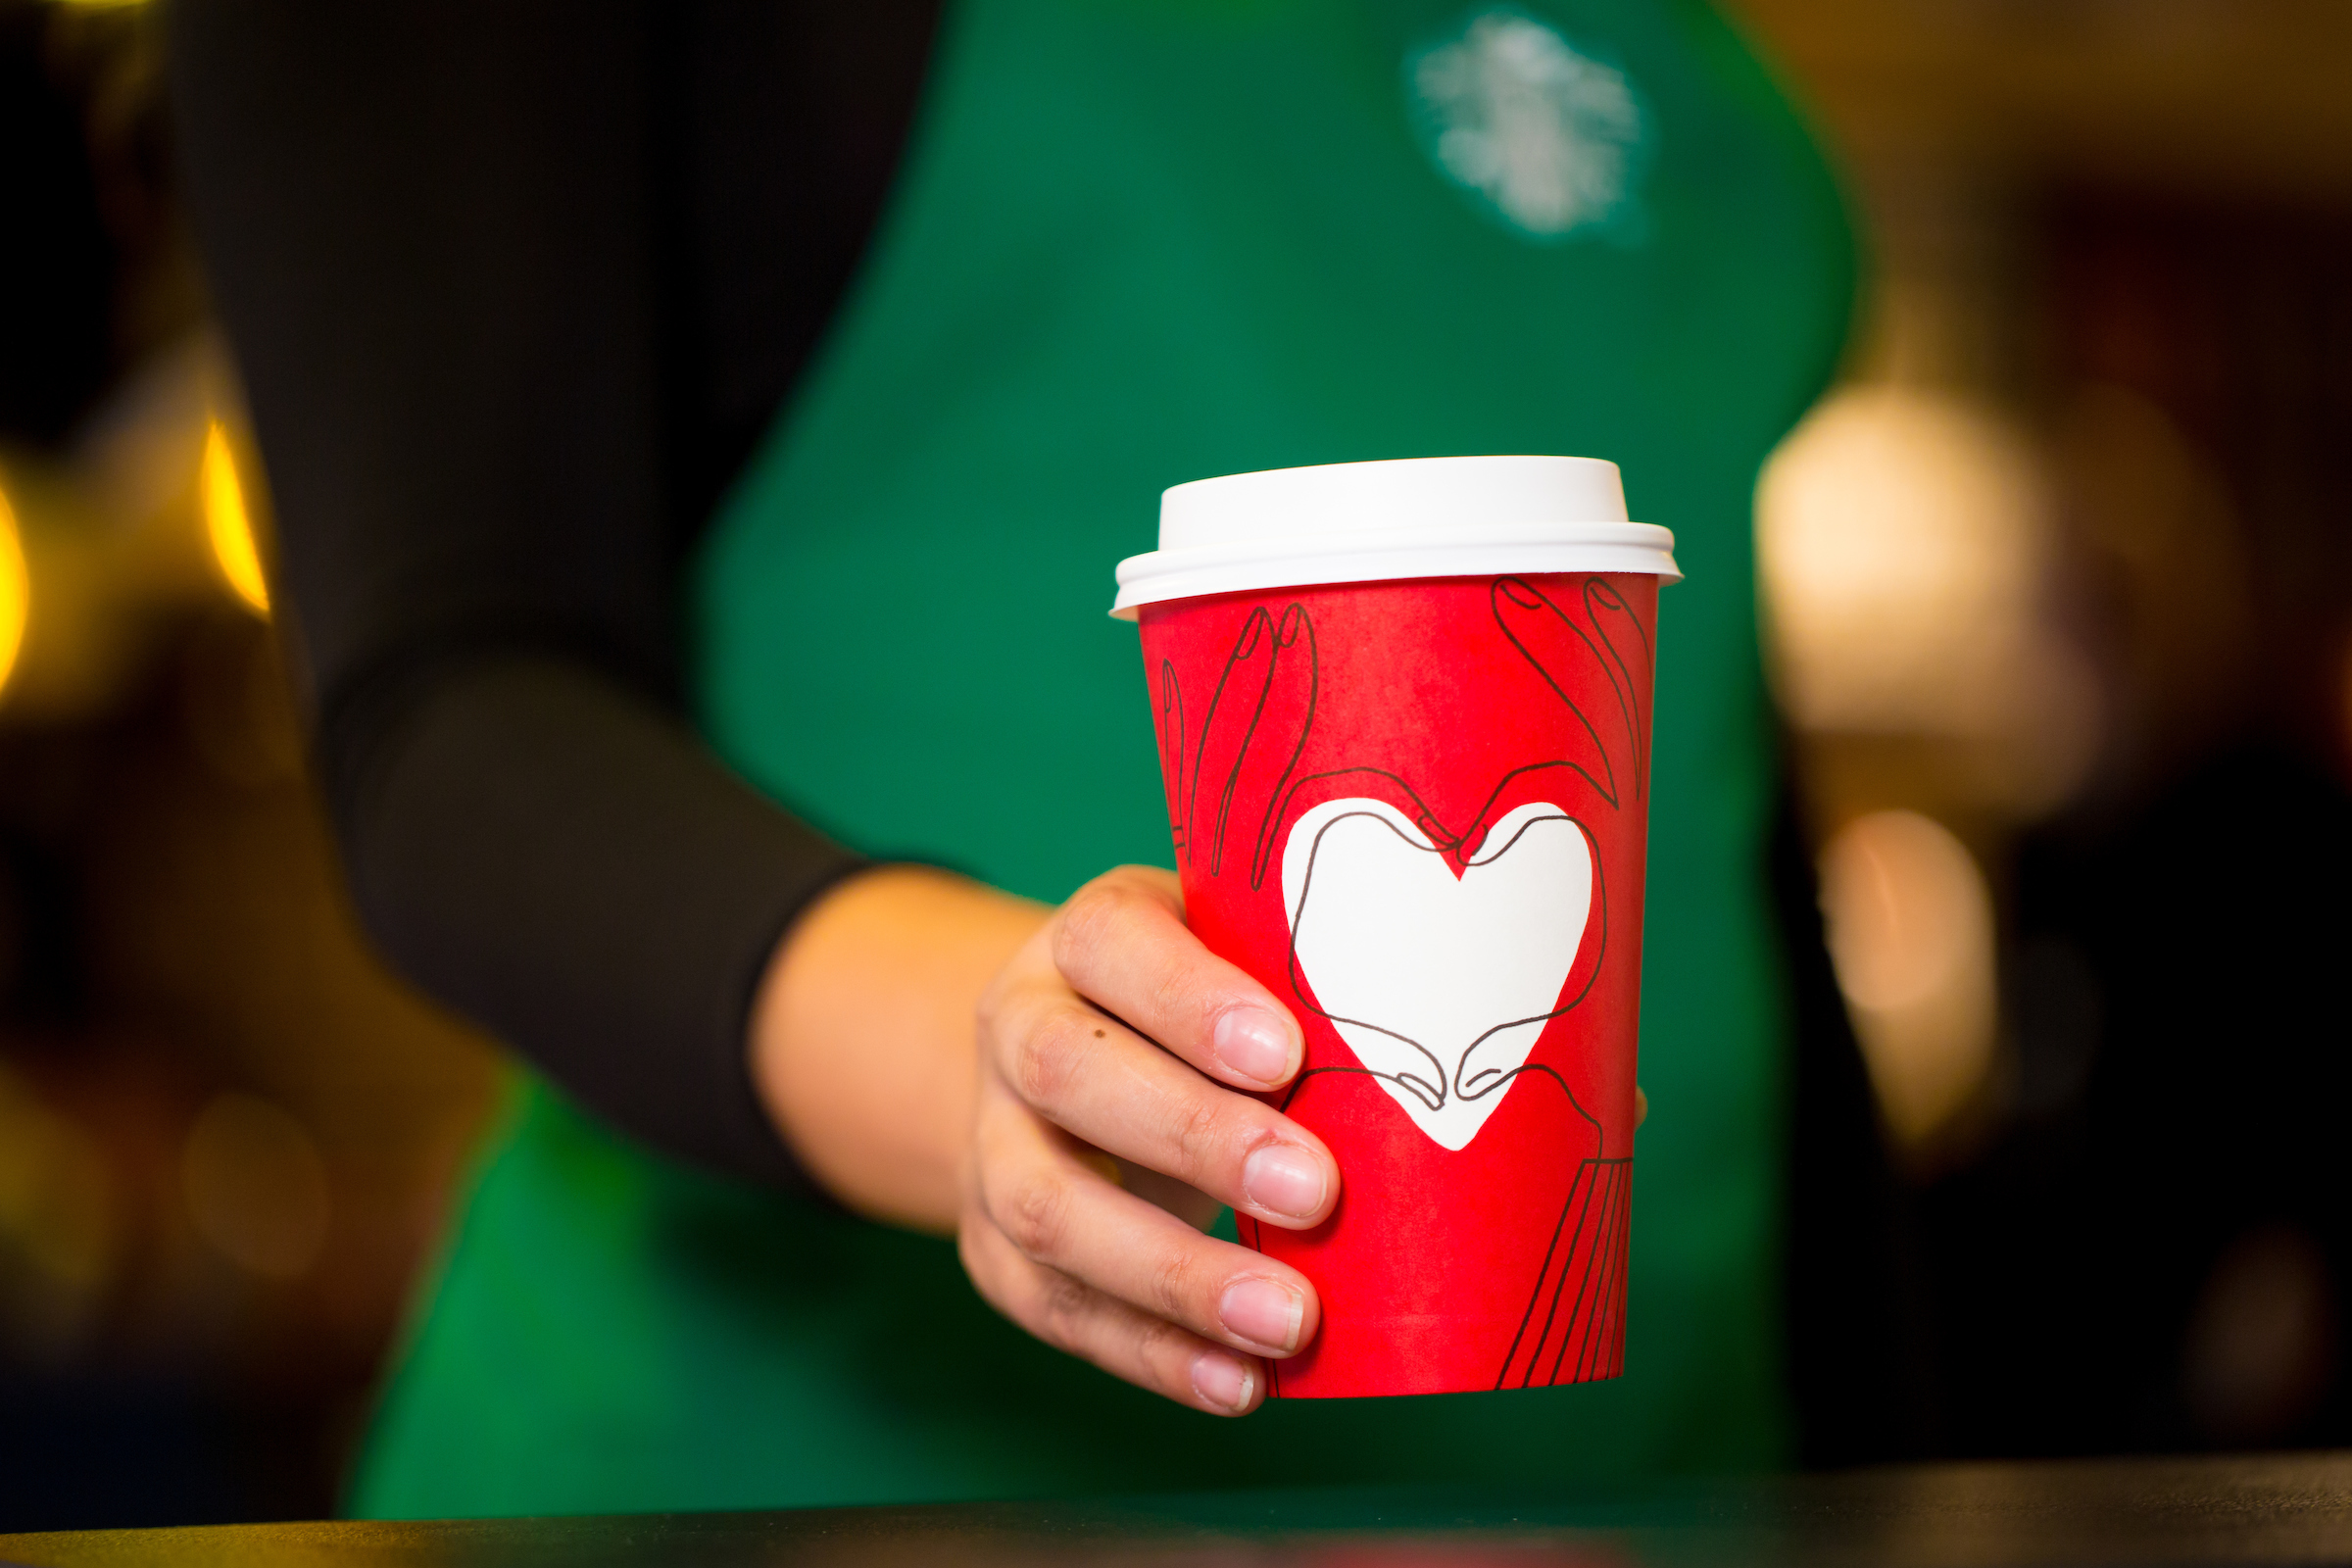 Starbucks Employees Are Getting a Pay Raise